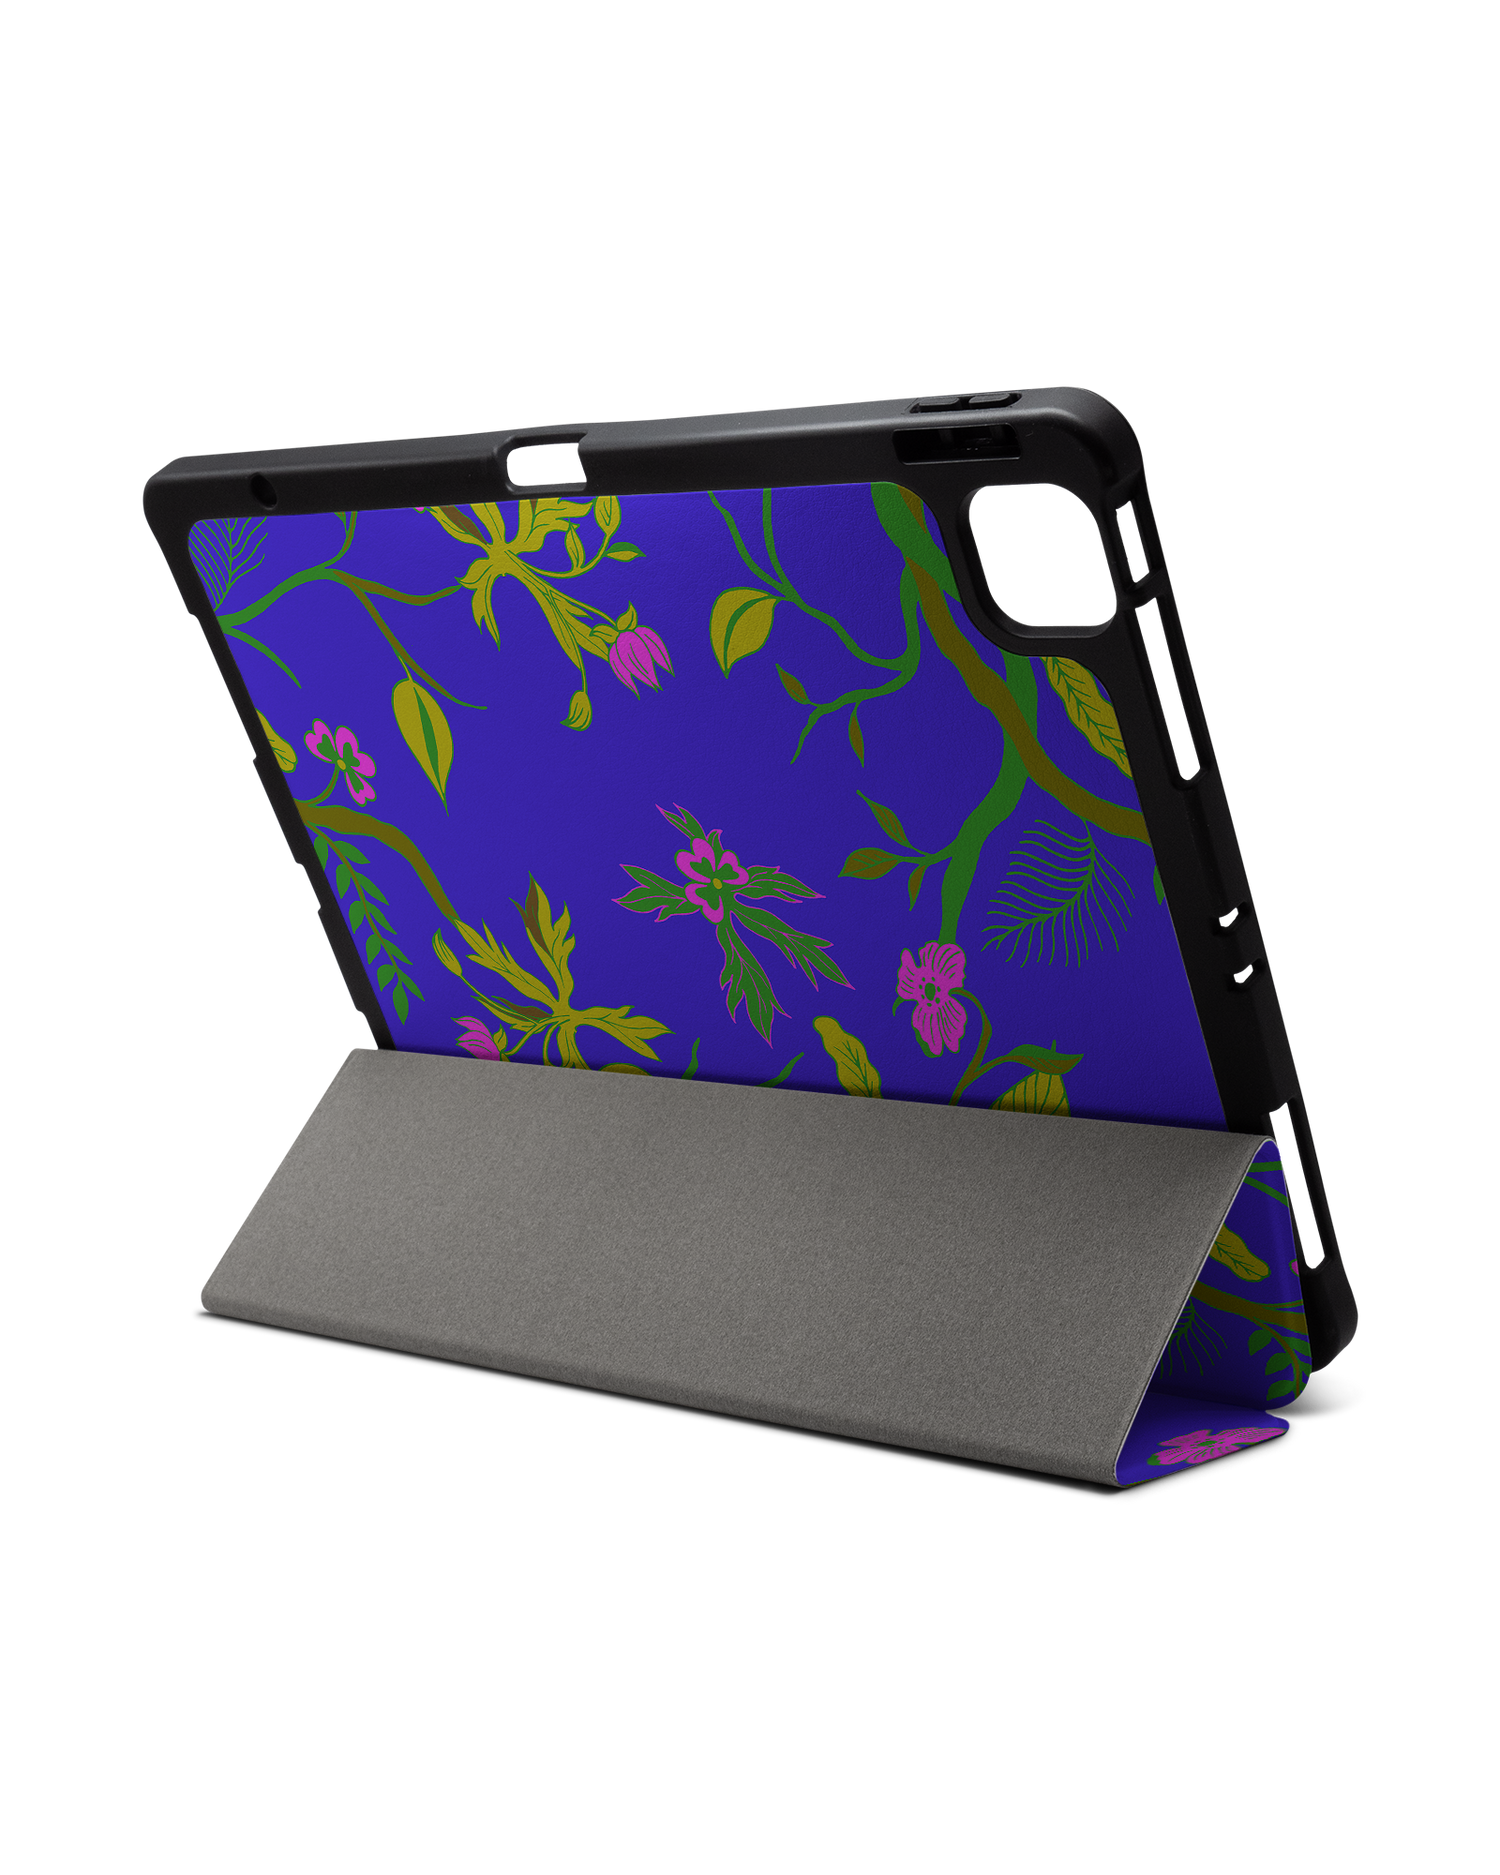 Ultra Violet Floral iPad Case with Pencil Holder for Apple iPad Pro 6 12.9